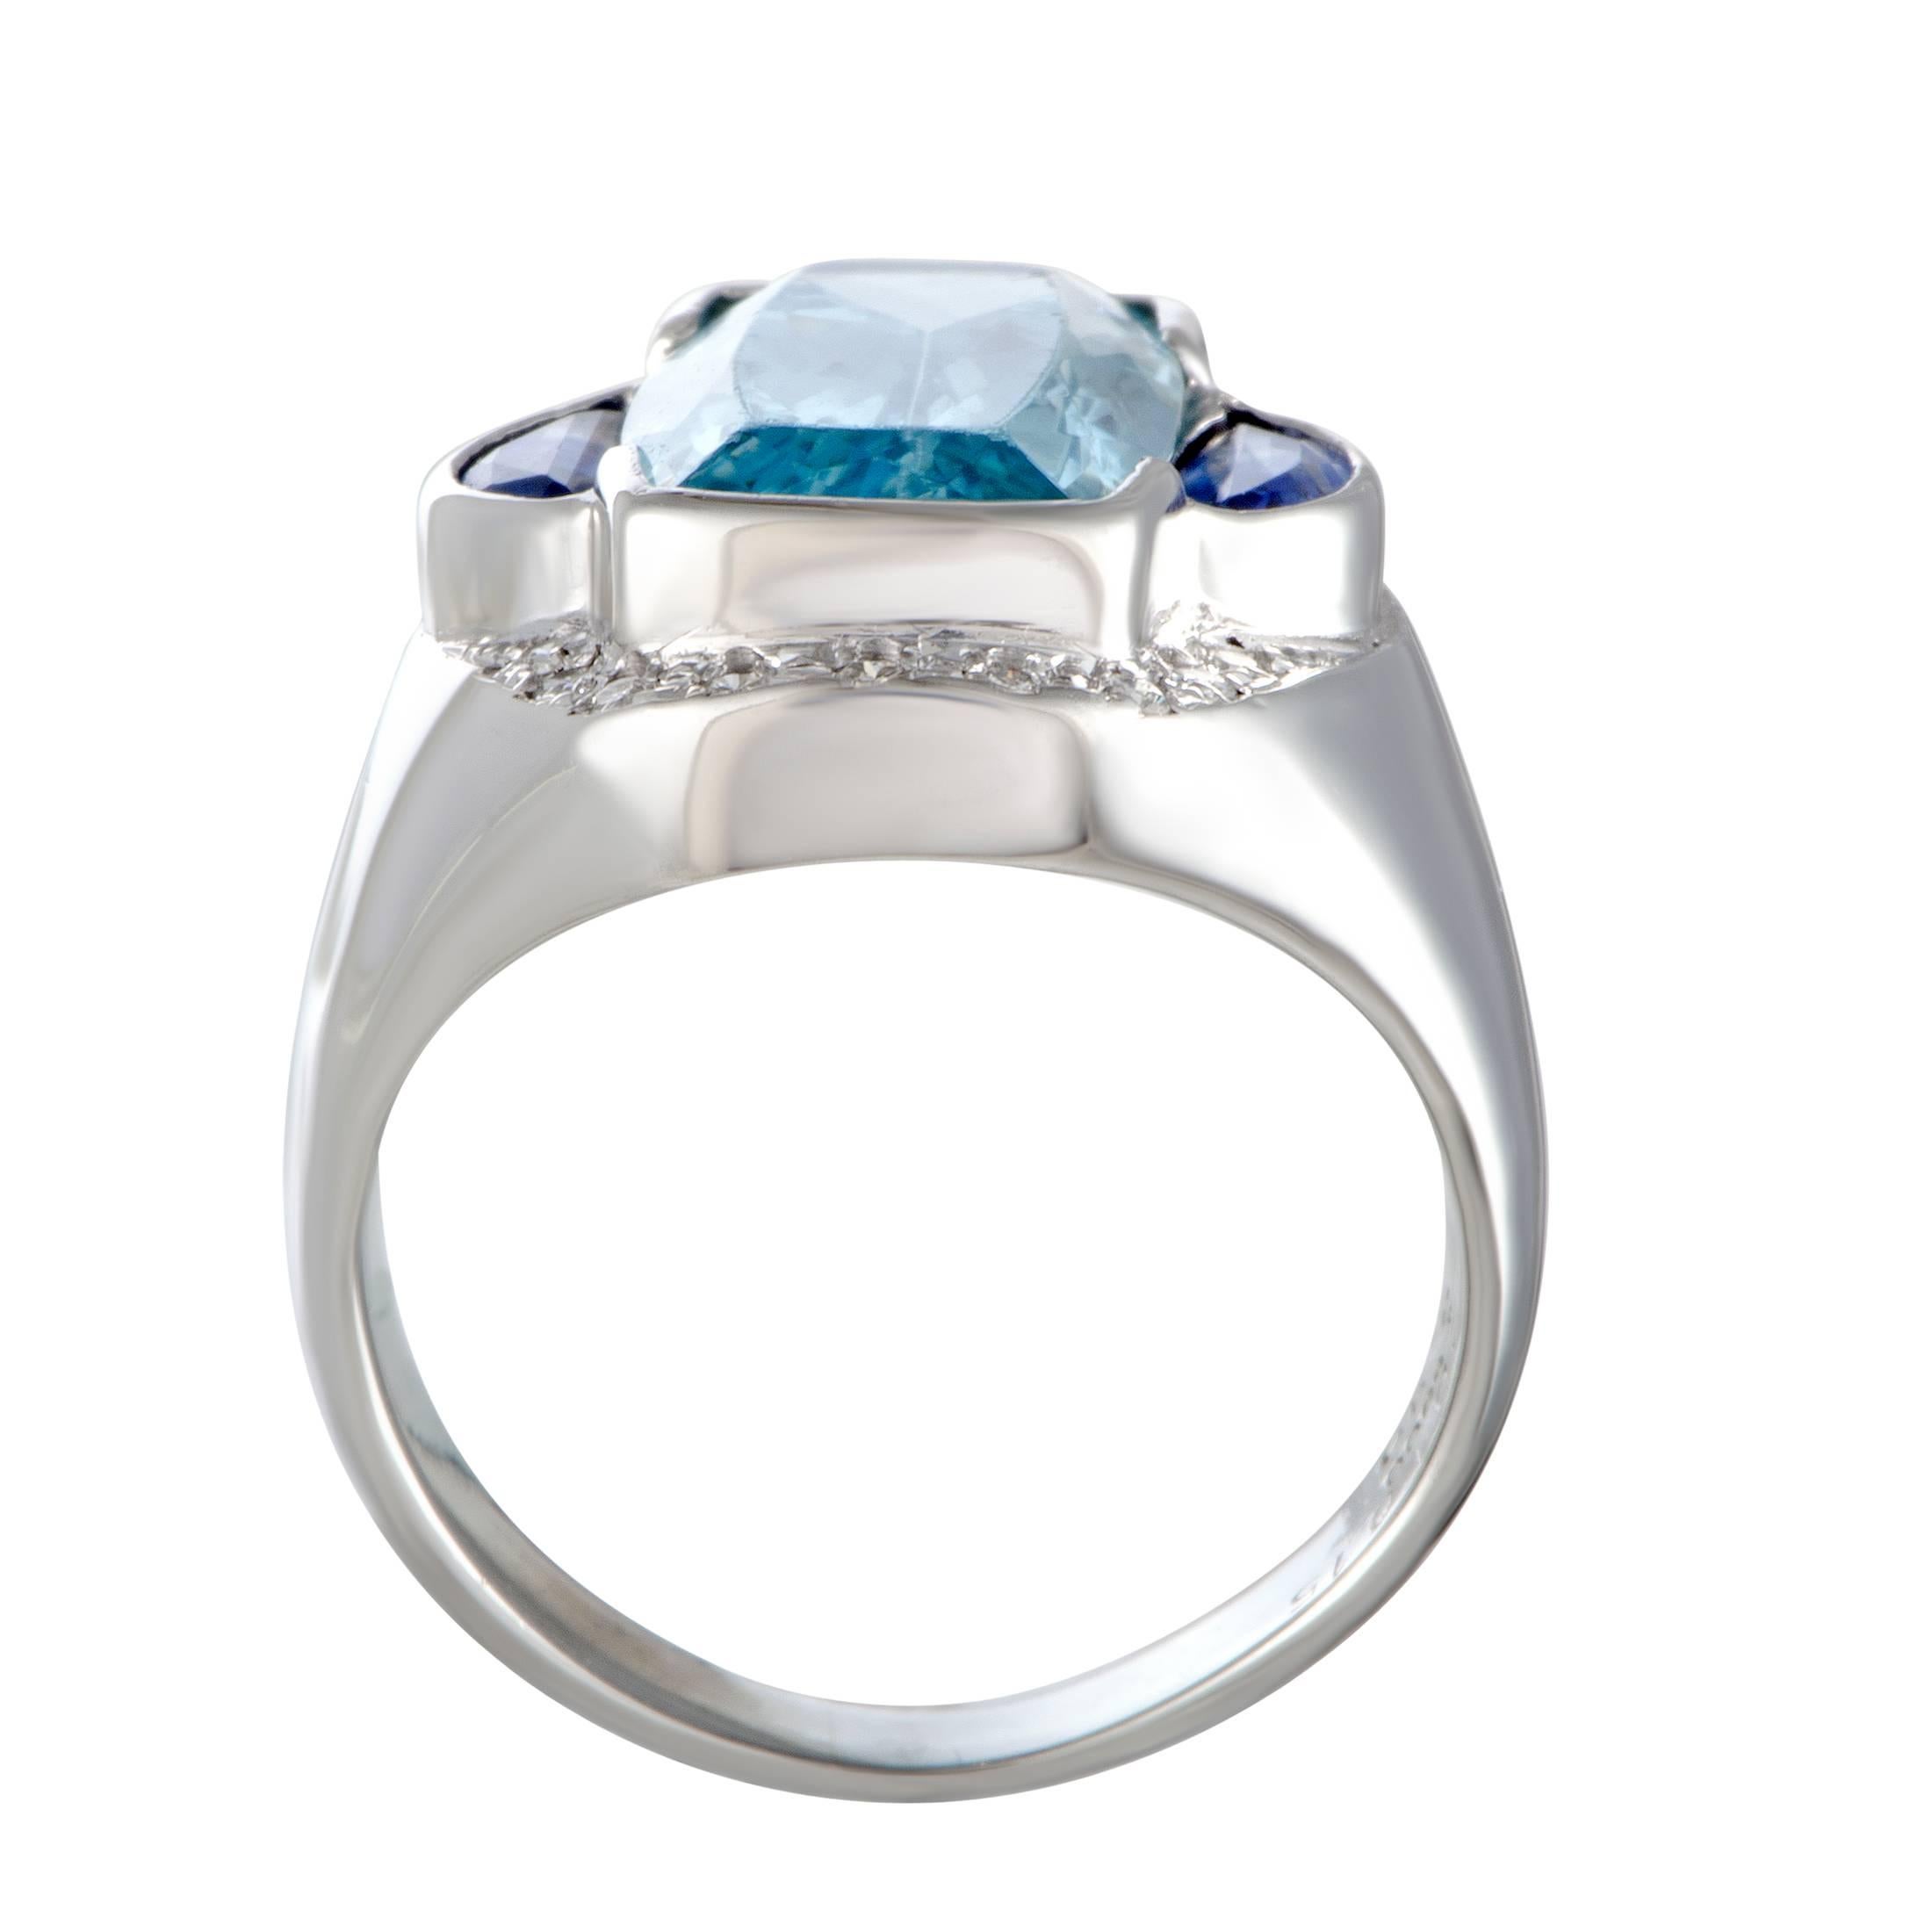 A compellingly offbeat design and an irresistibly harmonious gemstone décor are combined in this spectacular ring into creating a piece of immense aesthetic and artistic value. The ring is made of platinum and embellished with 0.15 carats of